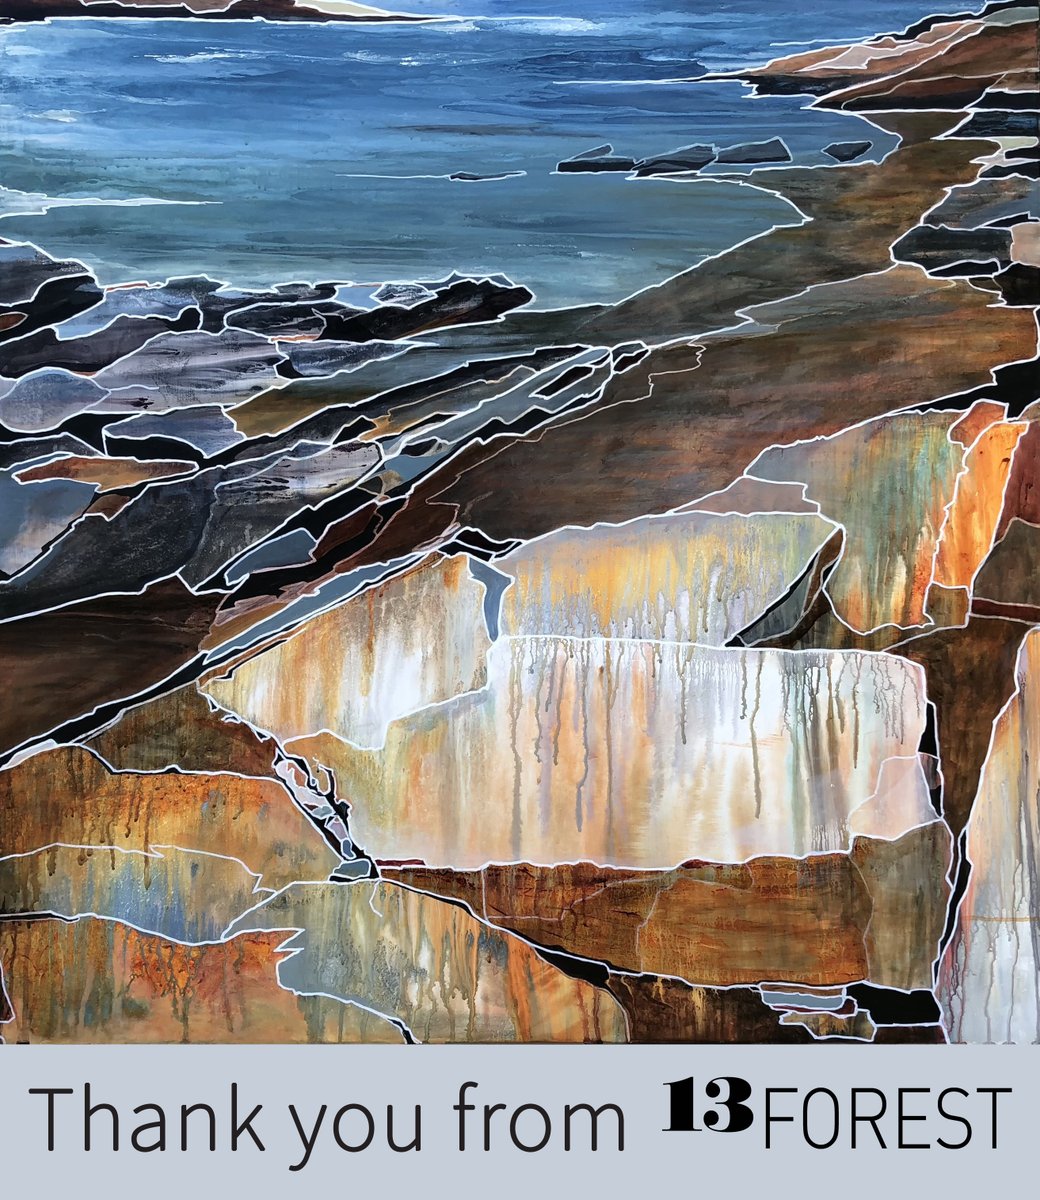 Only two days left to use your Thank You Program benefit! We'll be here until 6 today 3/29 and from 11-6 tomorrow 3/30. Shannon Slattery, After the Rain, acrylic on Masonite 13forest.com/thankyou